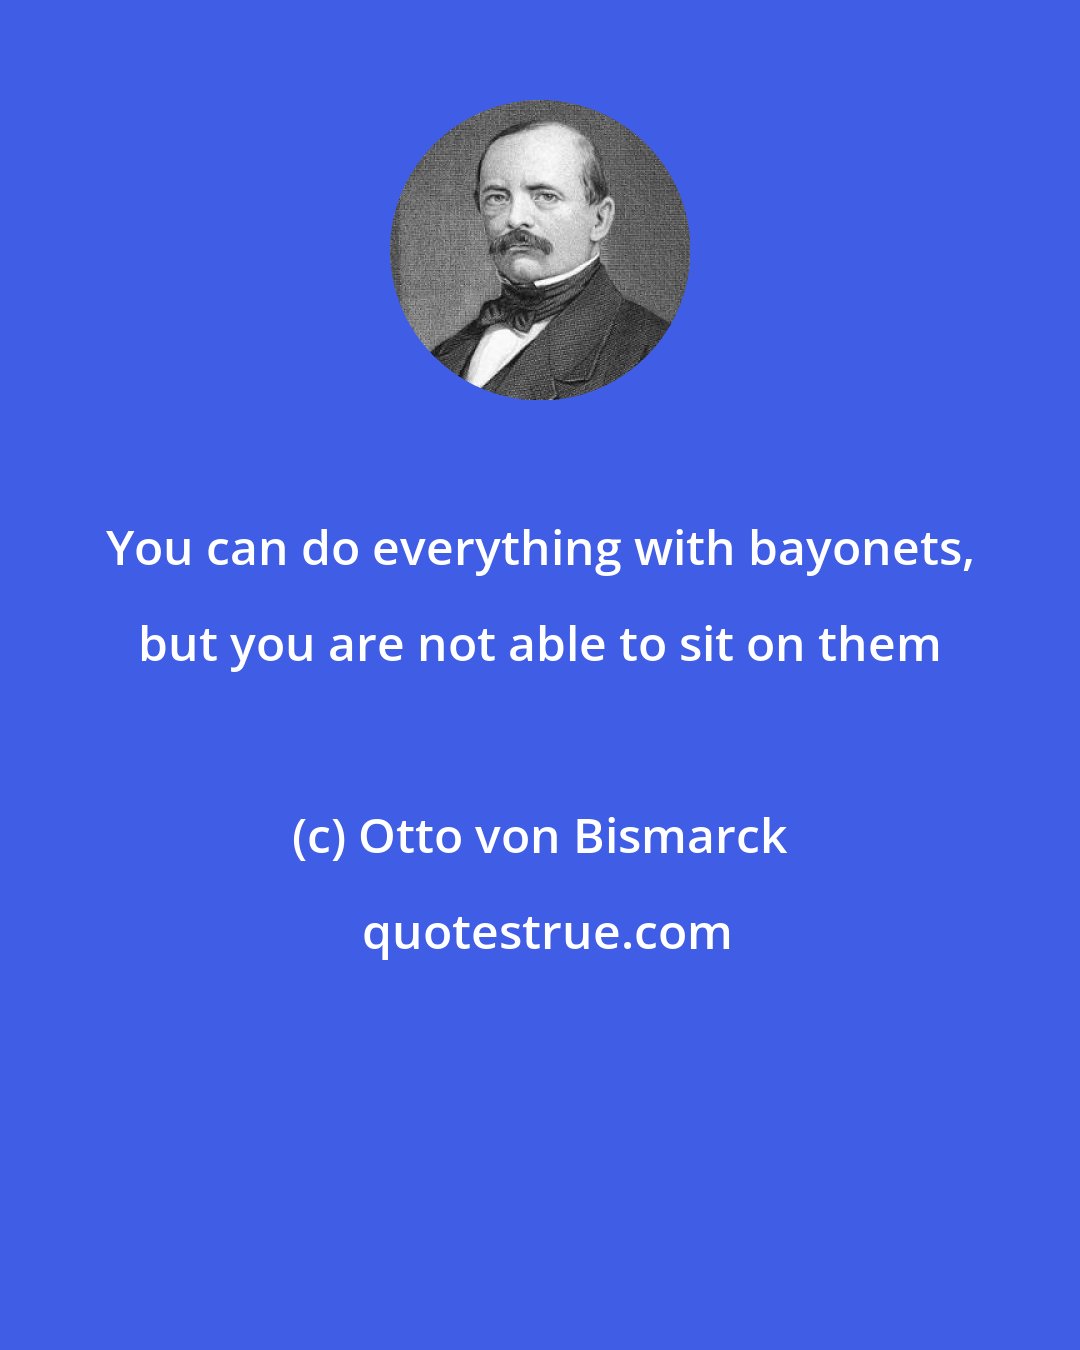 Otto von Bismarck: You can do everything with bayonets, but you are not able to sit on them